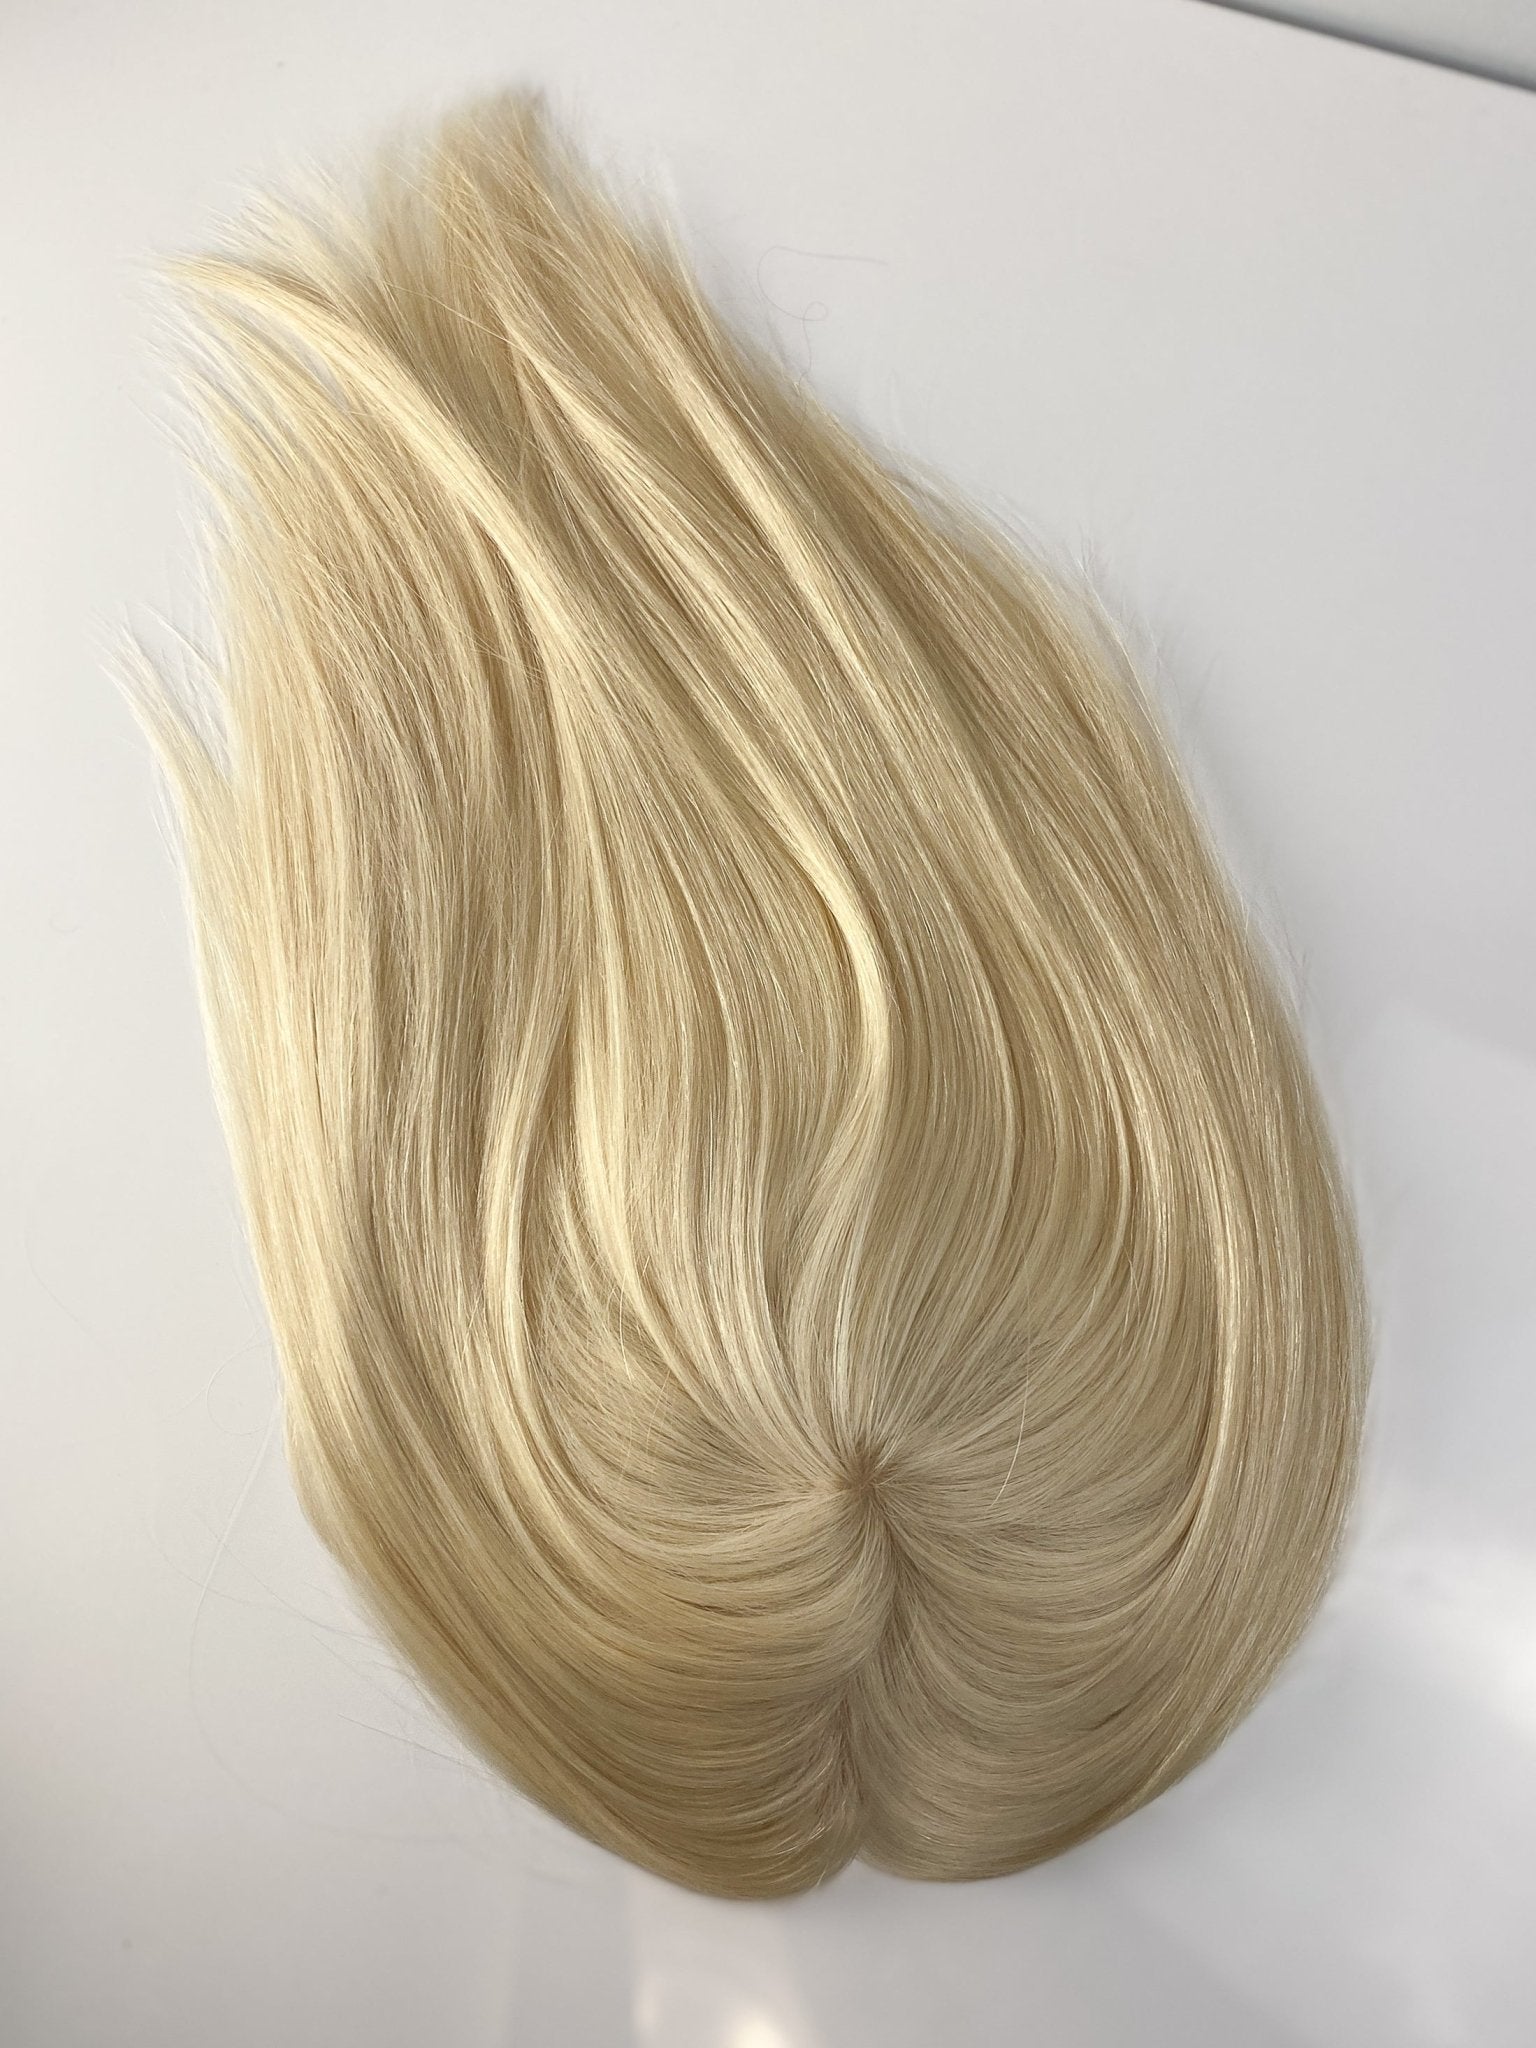 Bright Blonde 6x7 Wefted/Silk Topper - 12 inches - withlovebeautycollective